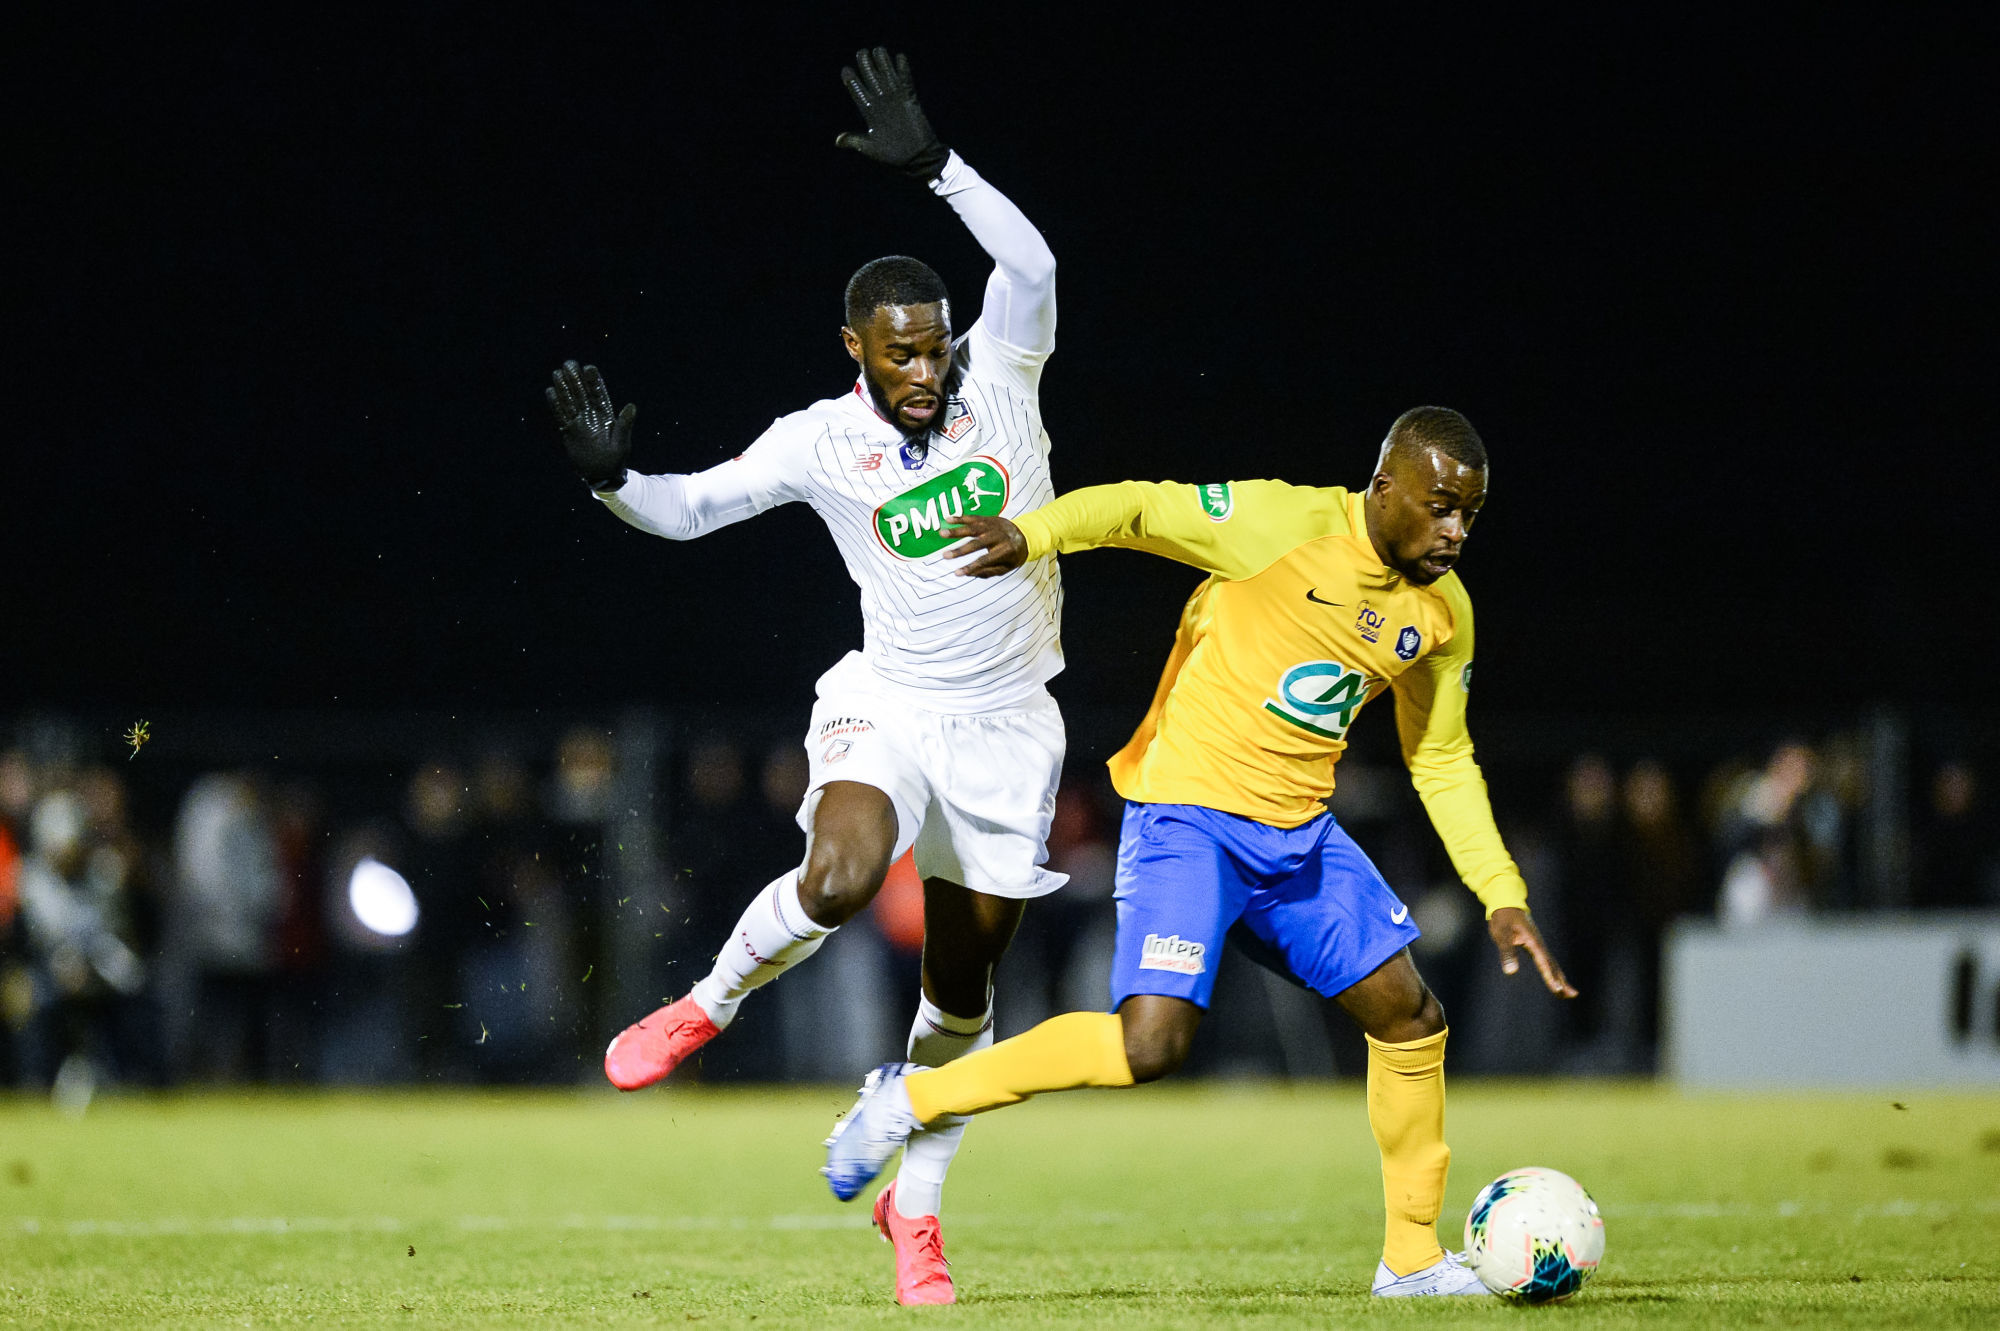 Jonathan BAMBA of Lille and David LUVUALU of Epinal during the French Cup soccer match between Epinal and Lille on January 29, 2020 in Epinal, France. (Photo by Baptiste Fernandez/Icon Sport)